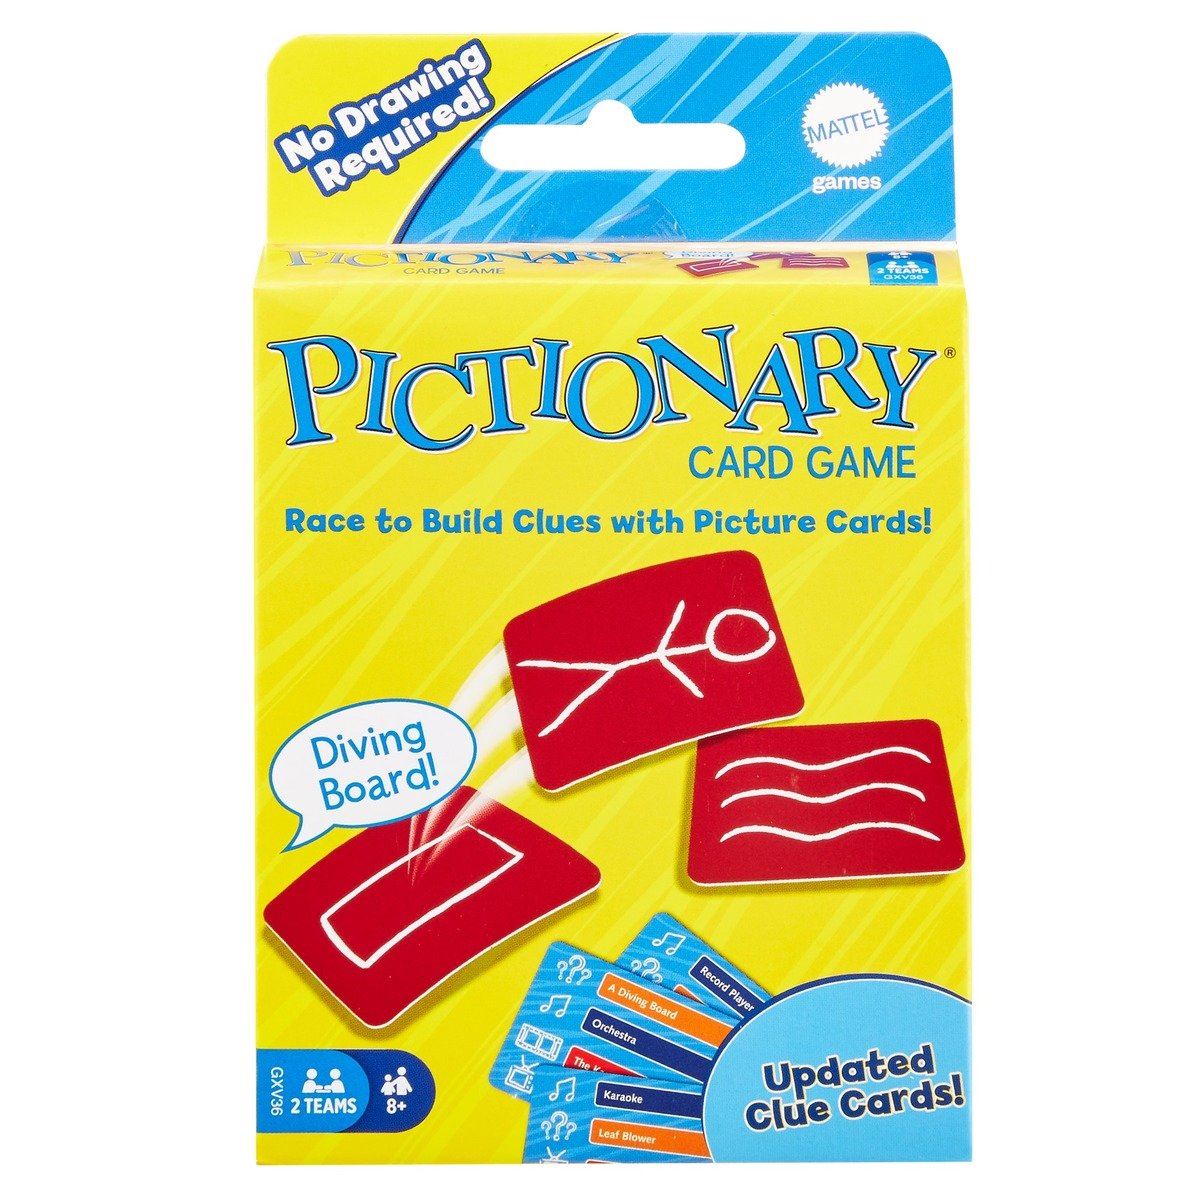 Pictionary Card Game GXV36 Family Fun Devinettes